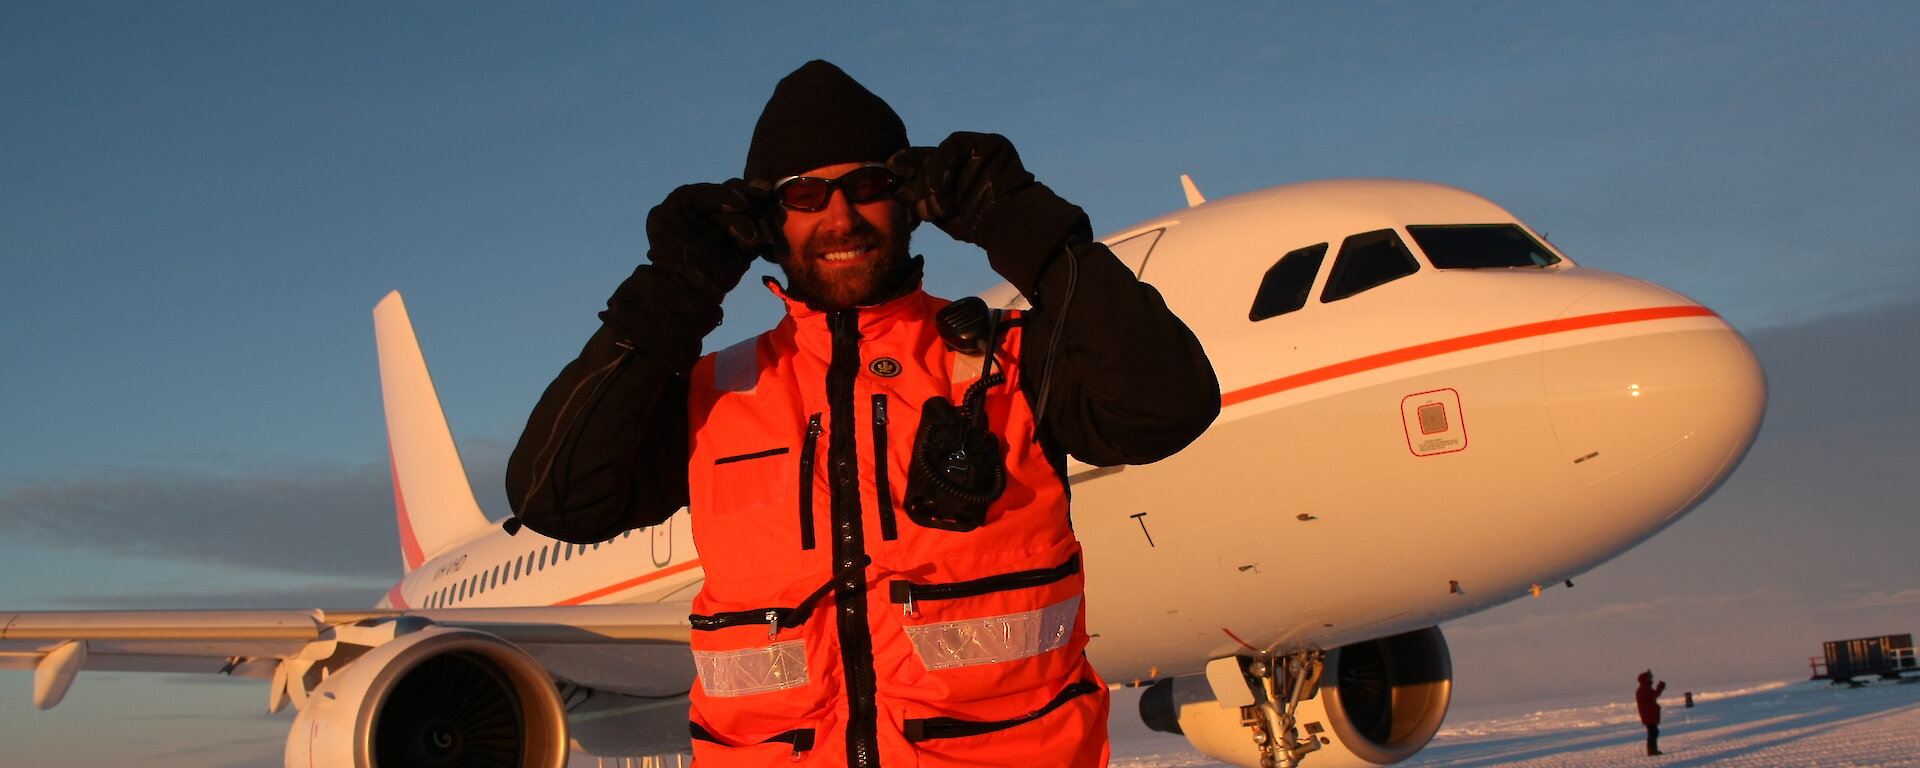 Expeditioner in front of aircraft